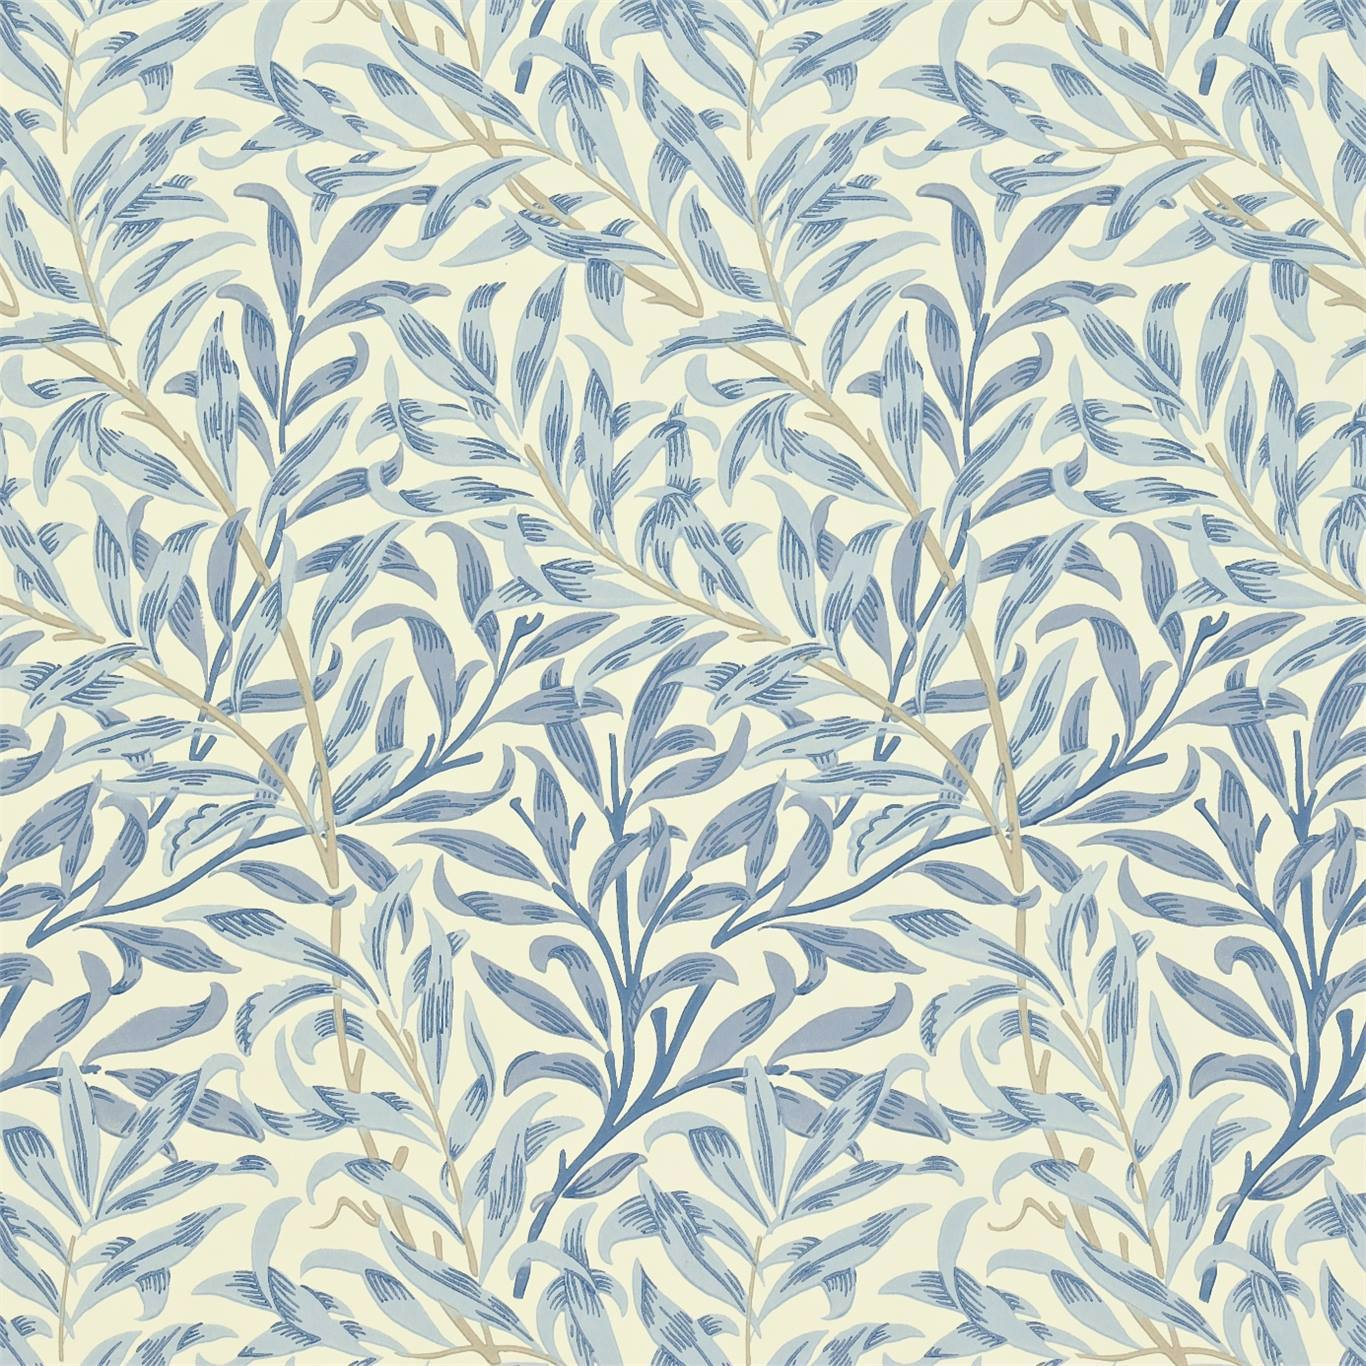 William Morris Willow Boughs Wallpaper DCMW216807 by Morris & Co